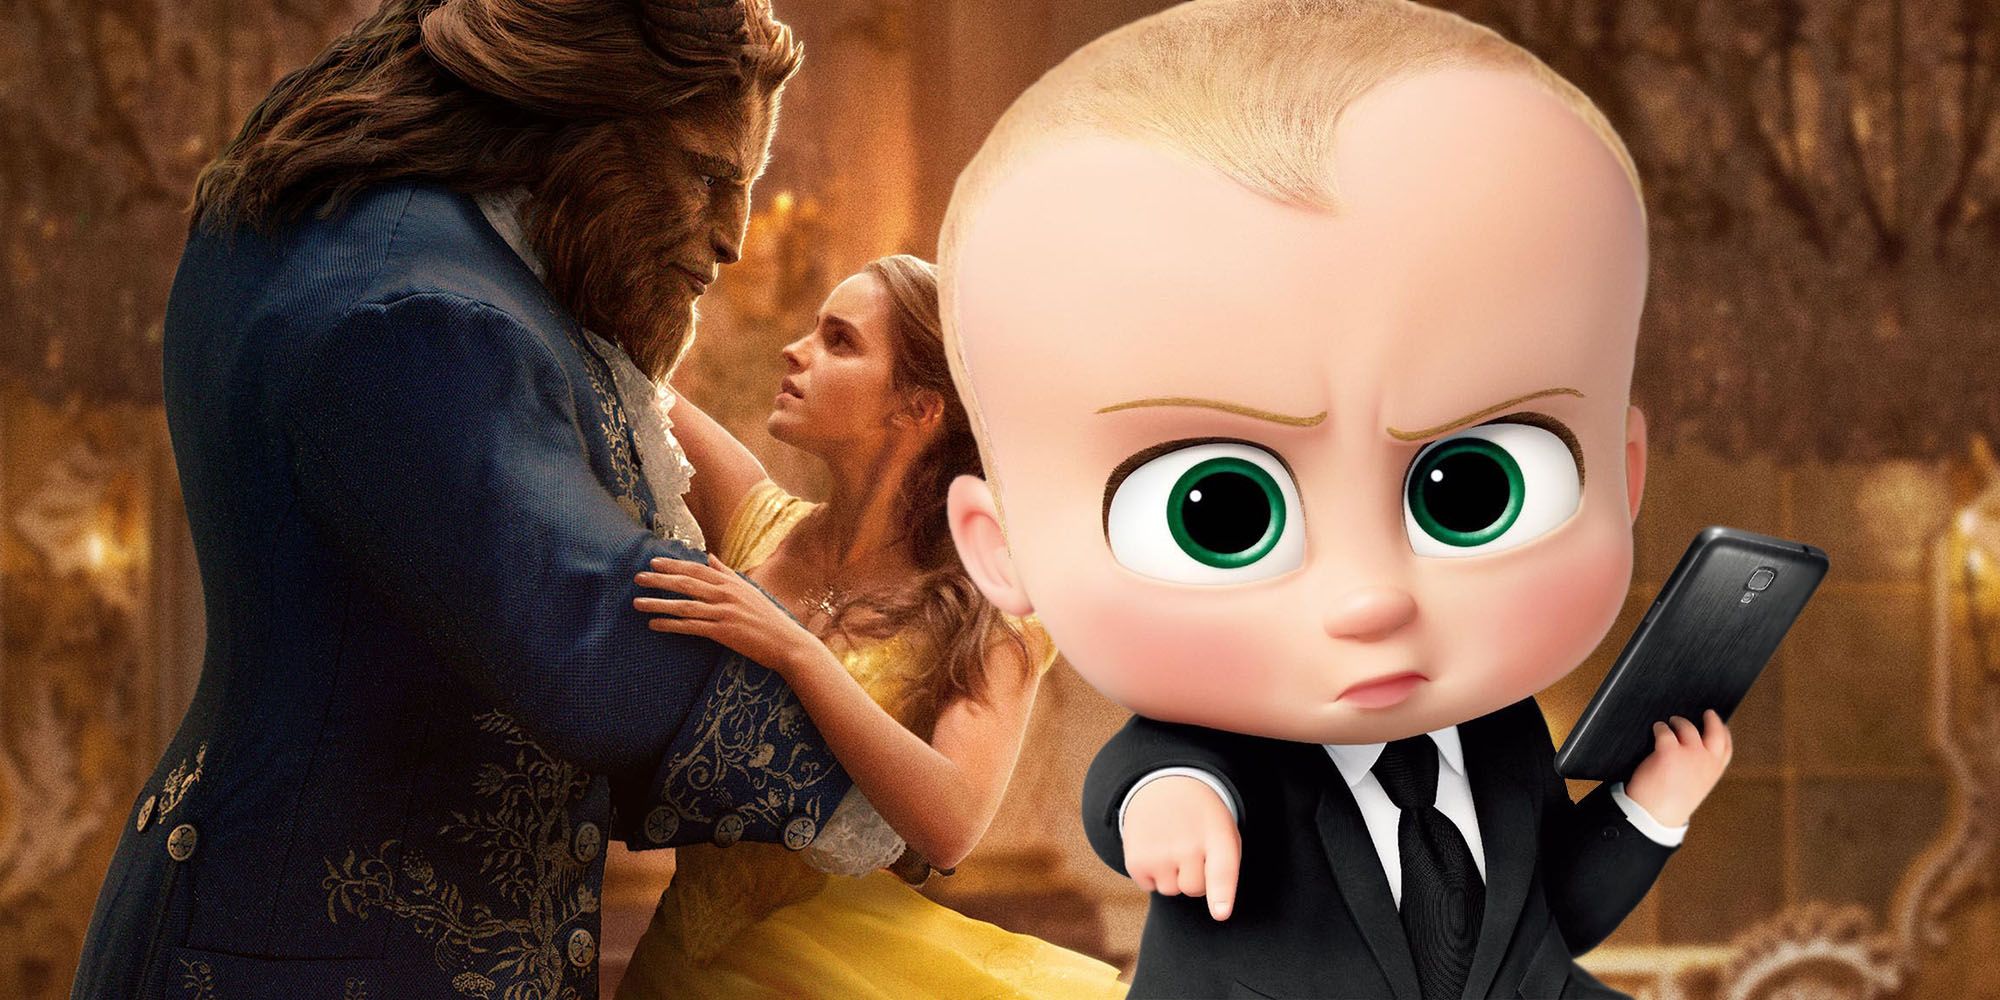 The Boss Baby vs. Beauty and the Beast